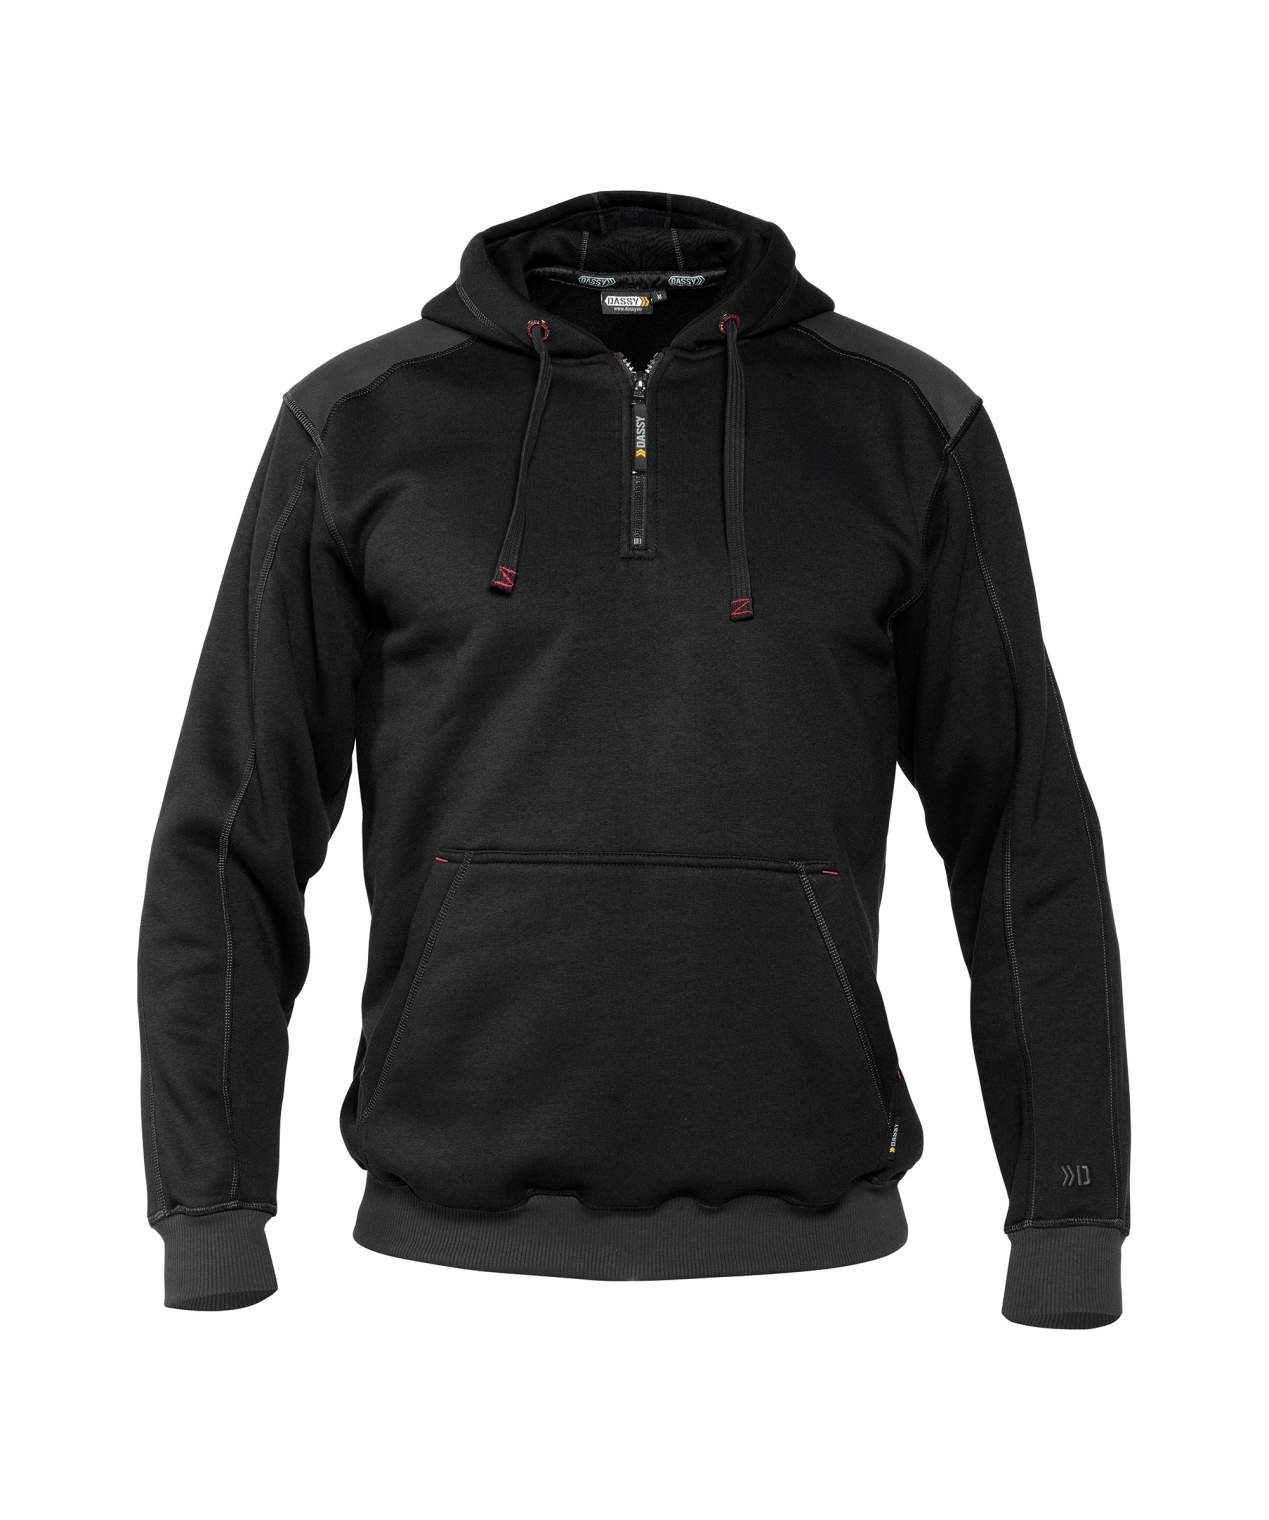 indy hooded sweatshirt black anthracite grey front